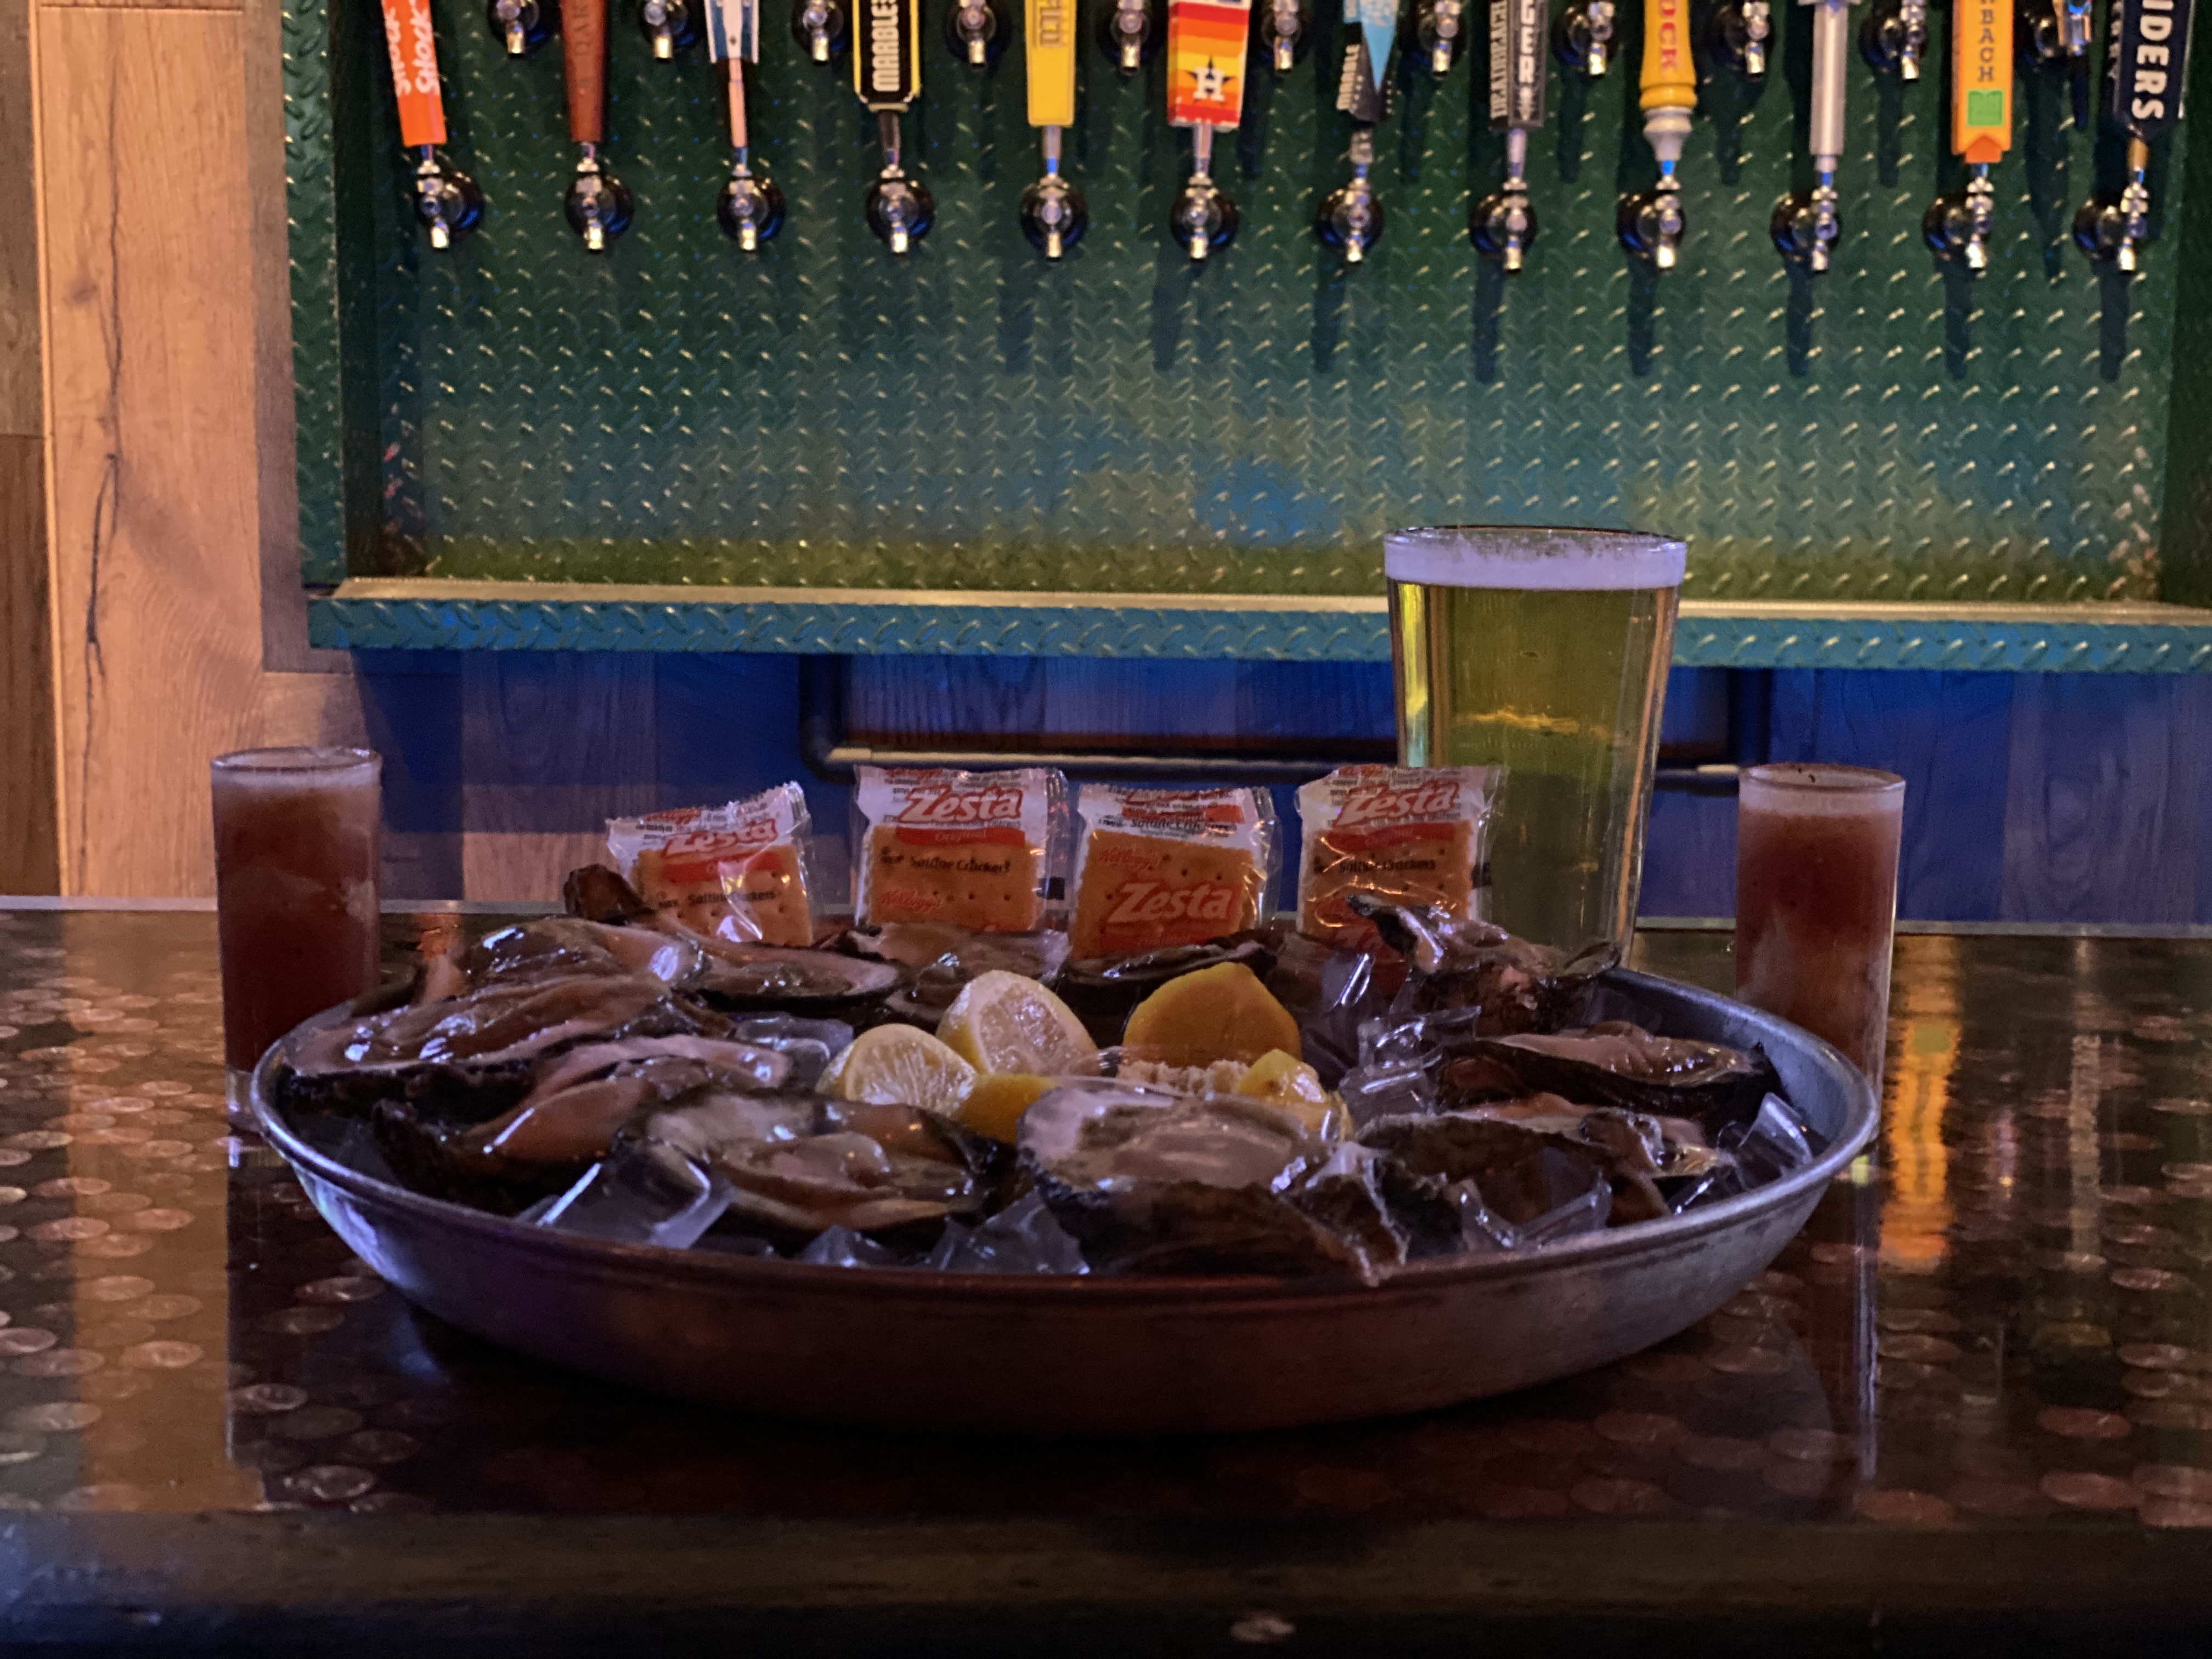 oysters with crackers and a glass of beer with beer taps in the background